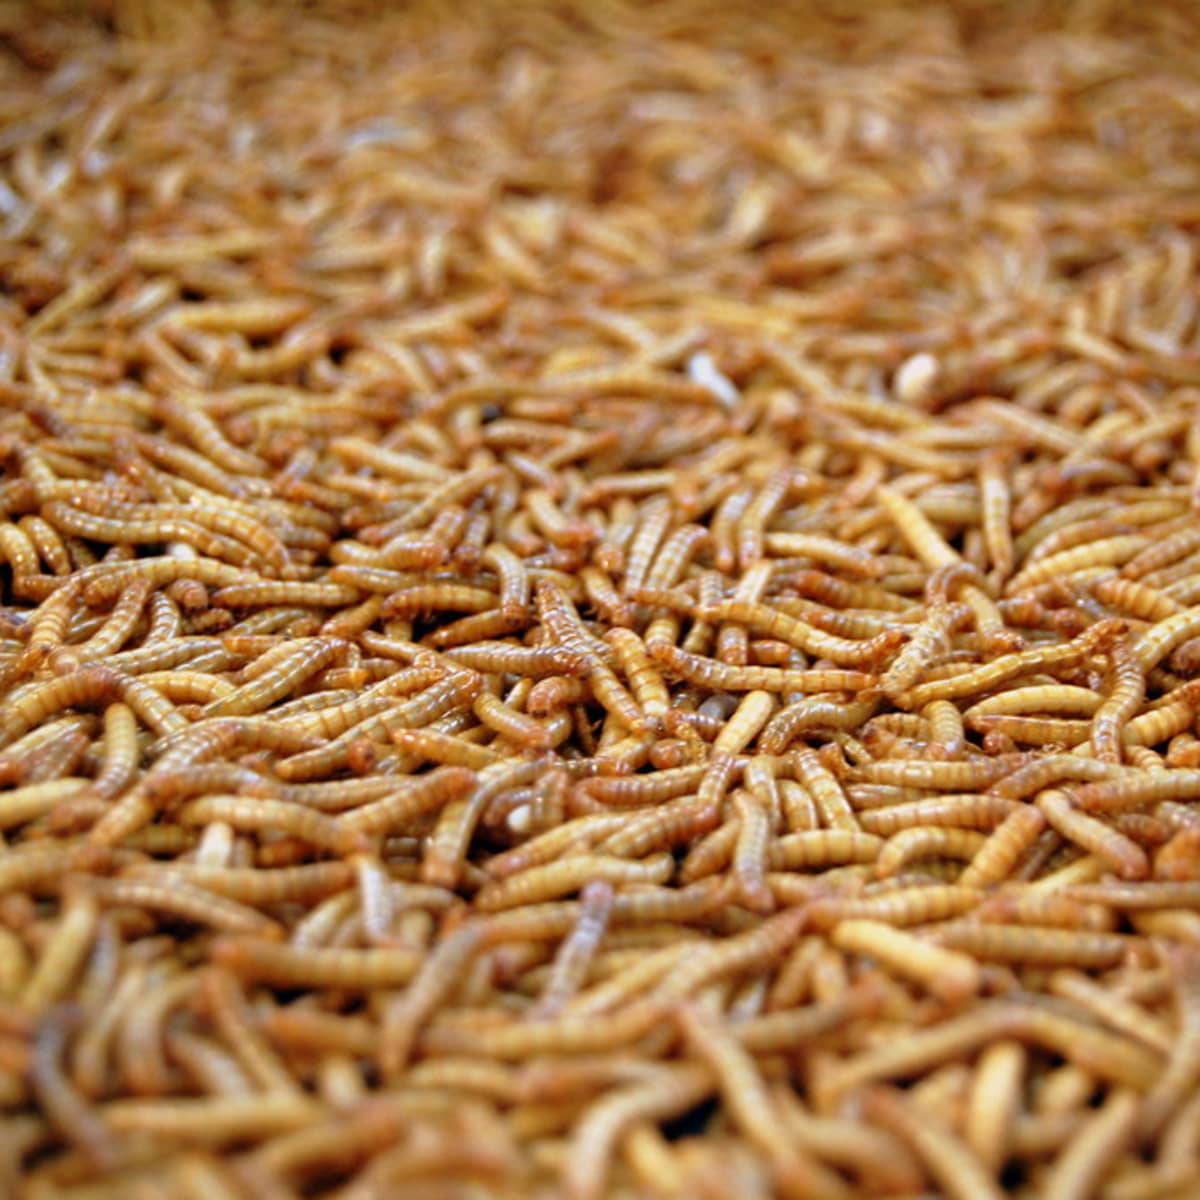 What Are Maggots And How To Get Rid Of